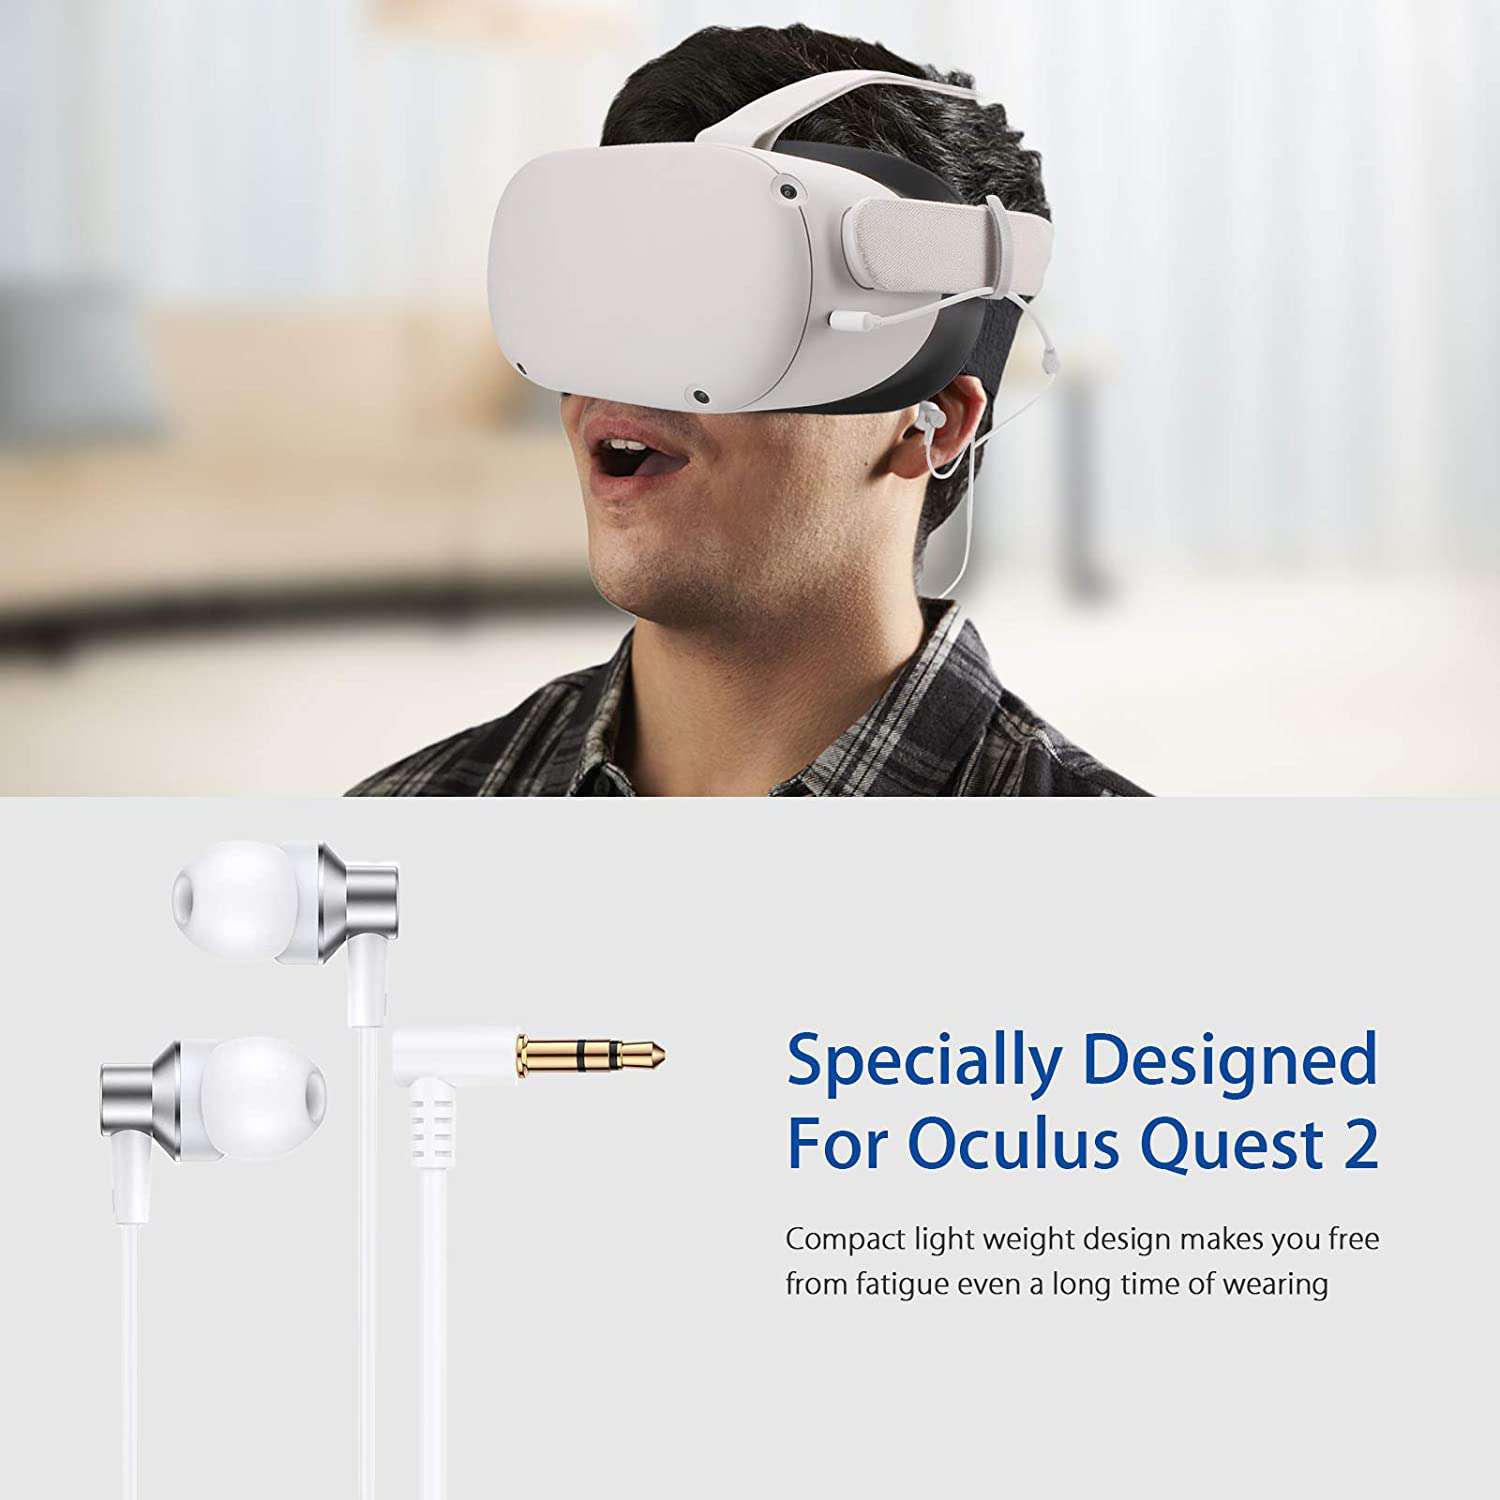 VR gaming with immersive audio. Comfortable and fatigue-free with a soft face mask